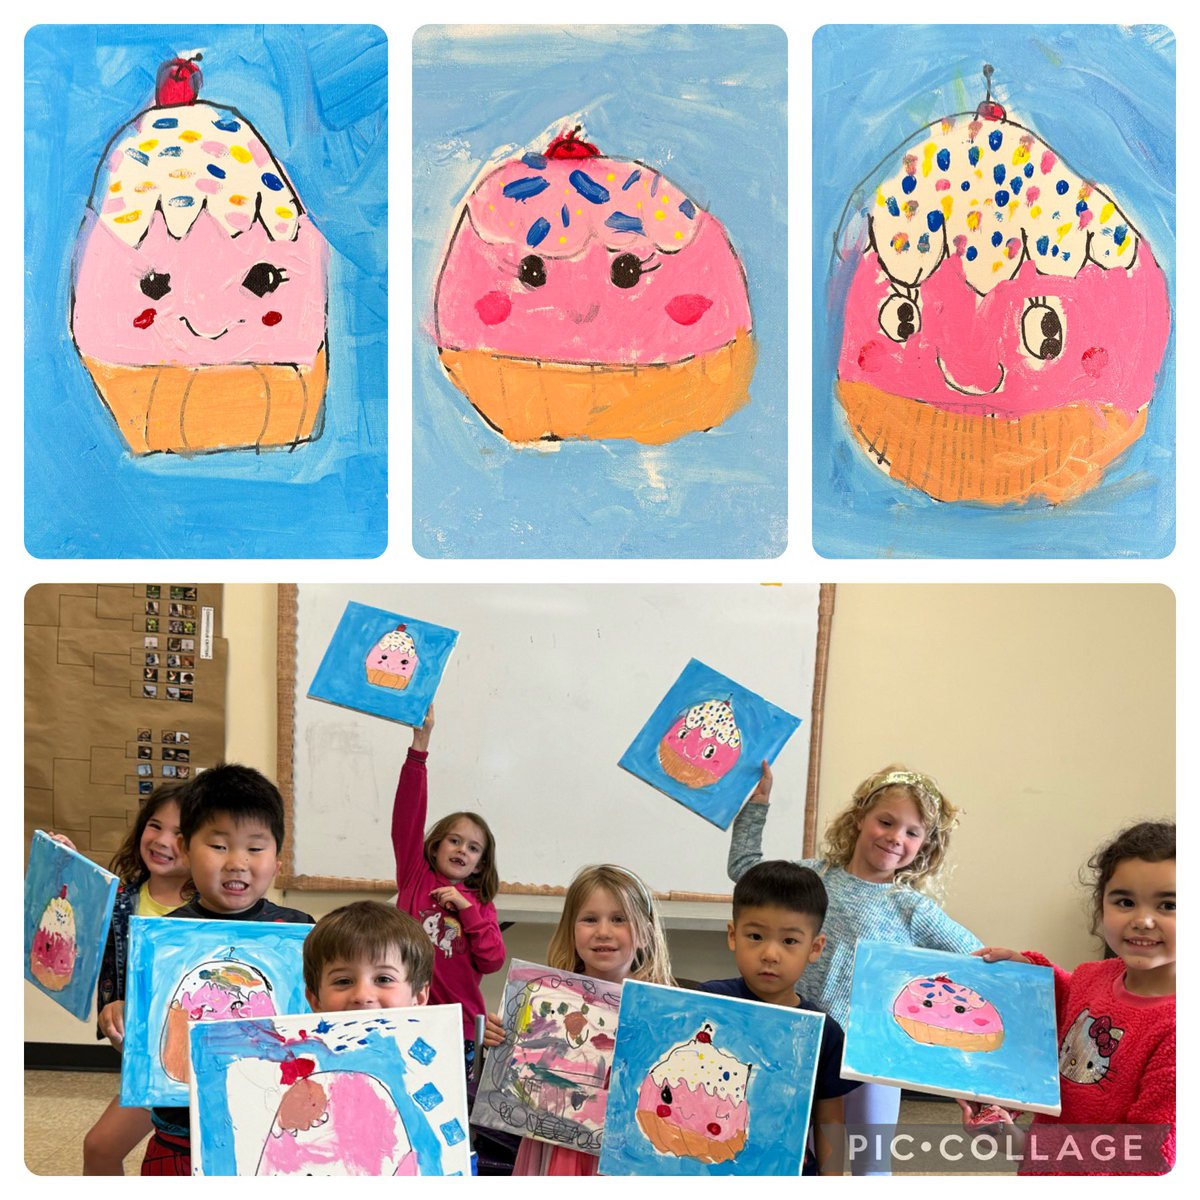 We are back from Spring Break! We painted these cute Squishy cupcakes with all our young artists!
#artoftheday #littleartists #kidsart #cupcakeart #firststartcs #firststartartstudio